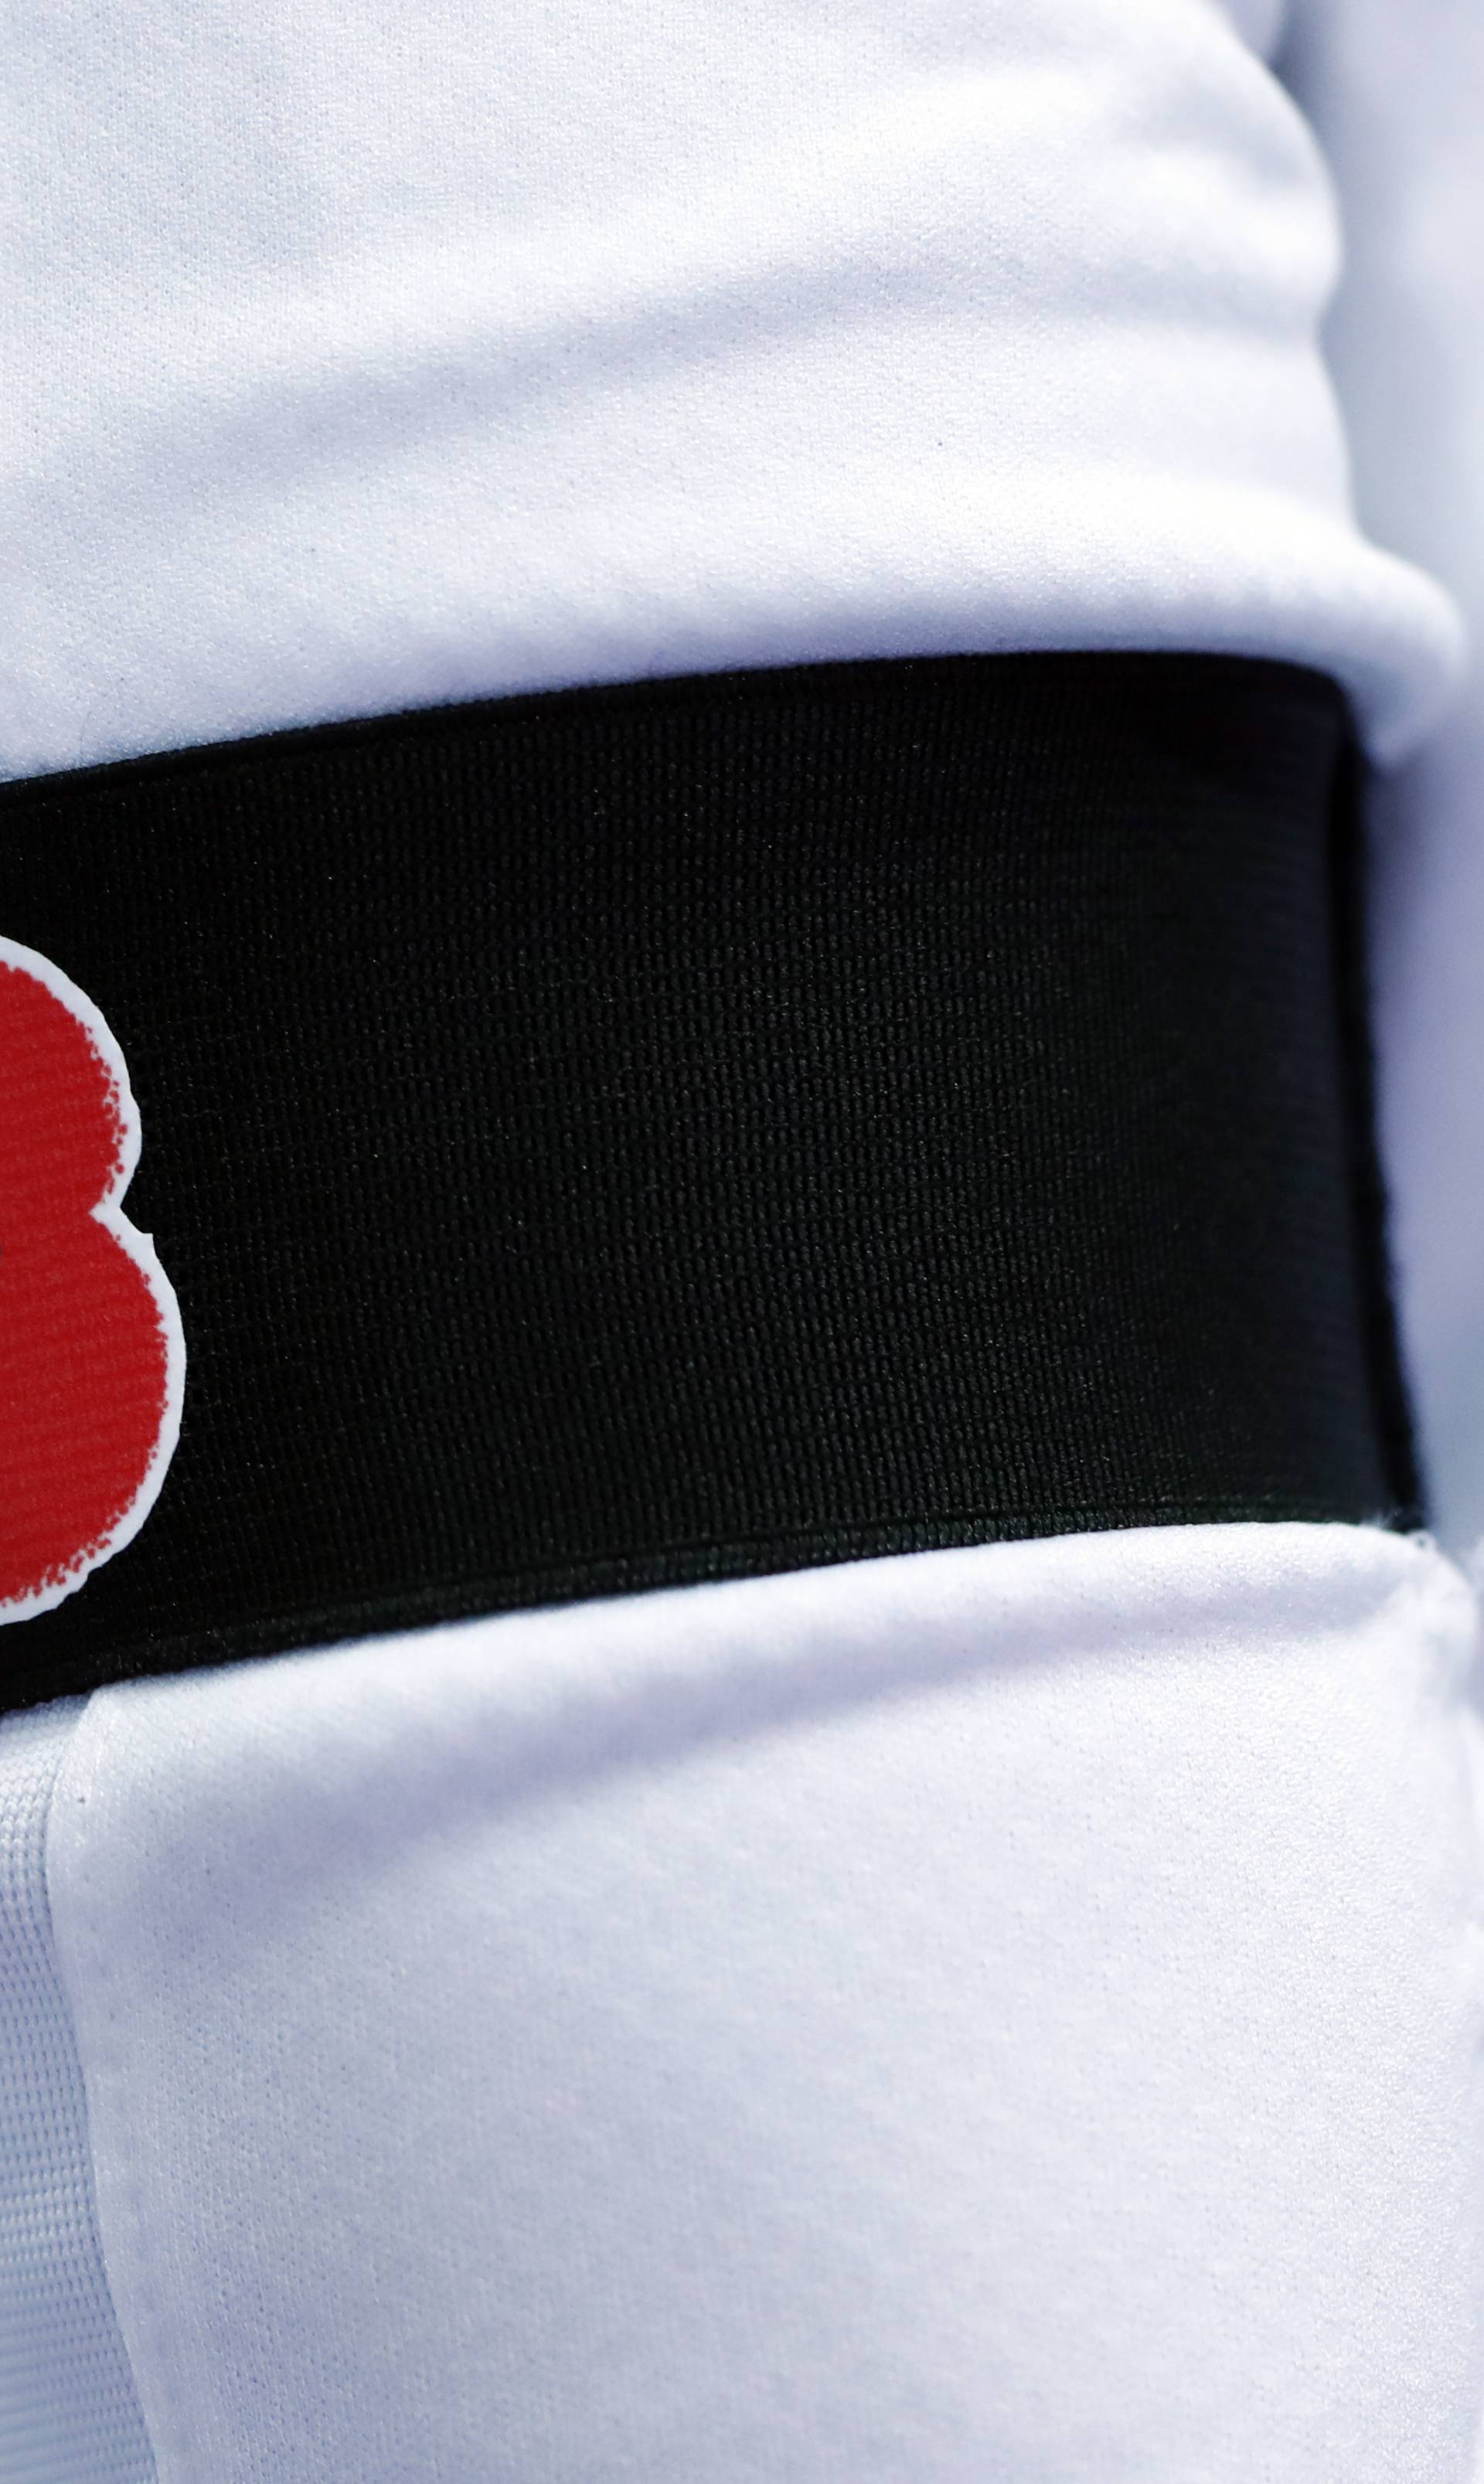 England players wear poppies on armbands as part of remembrance commemorations